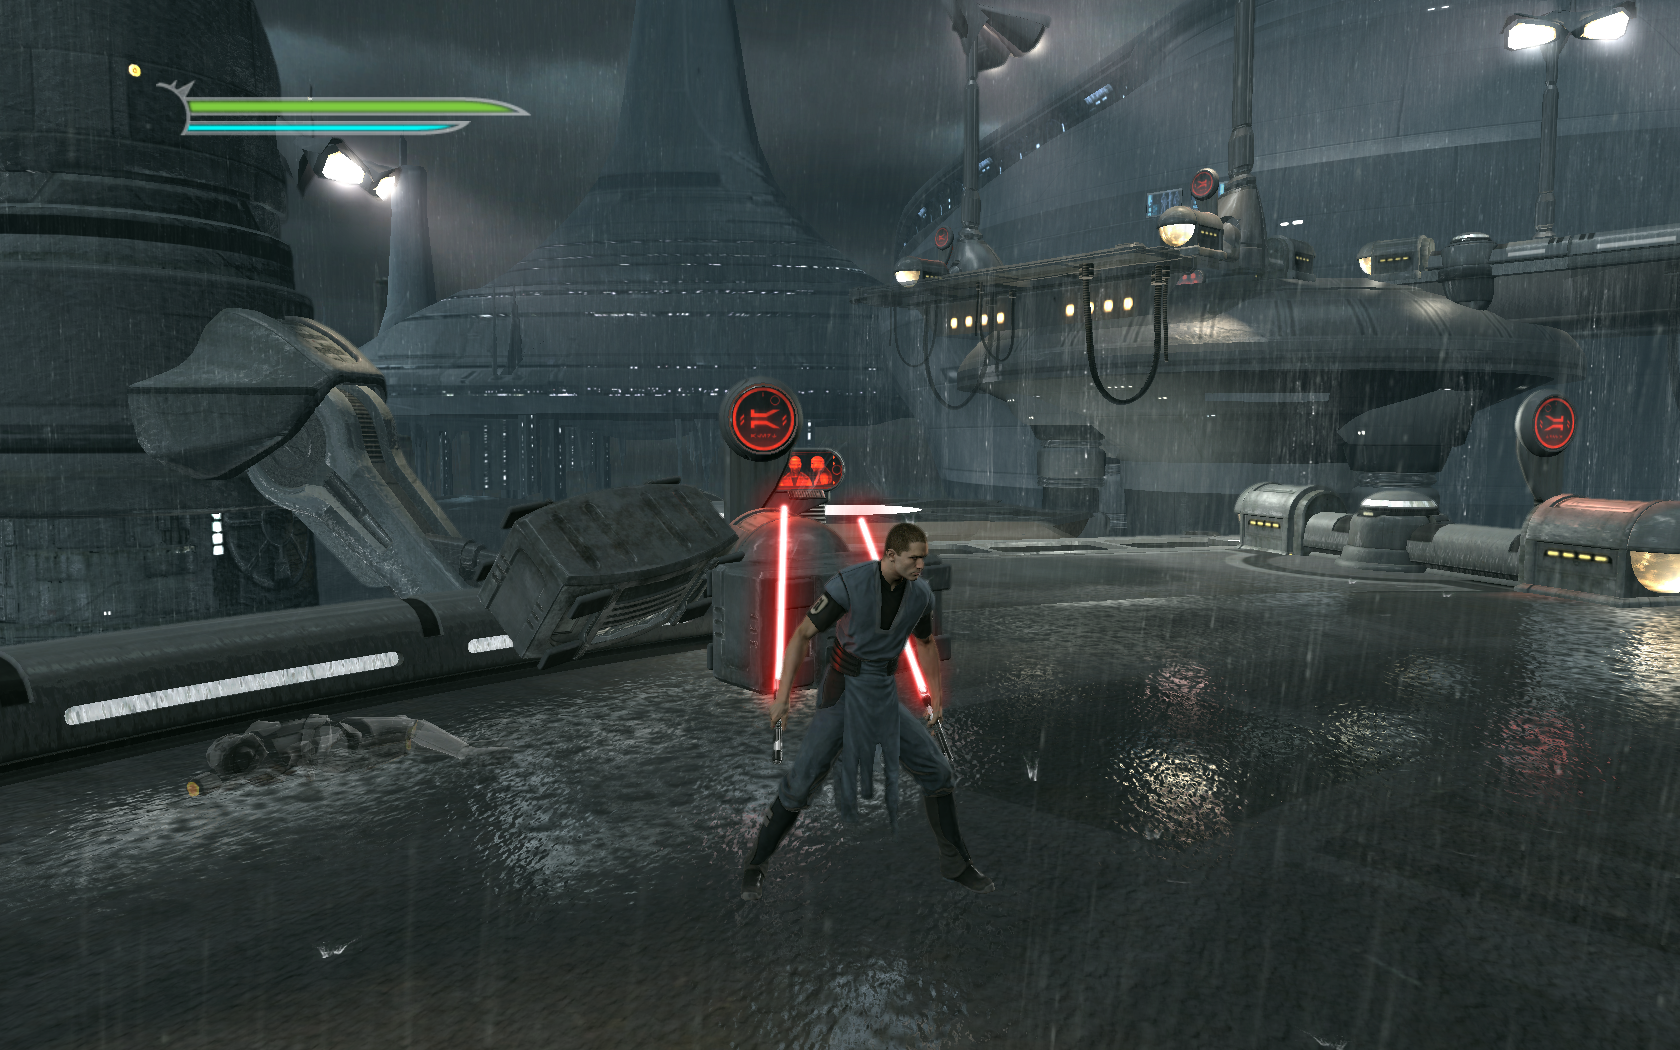 Мод игры star wars. Star Wars unleashed 2. Стар ВАРС the Force unleashed 2. Игра Star Wars unleashed 3. Star Wars Starkiller игра.